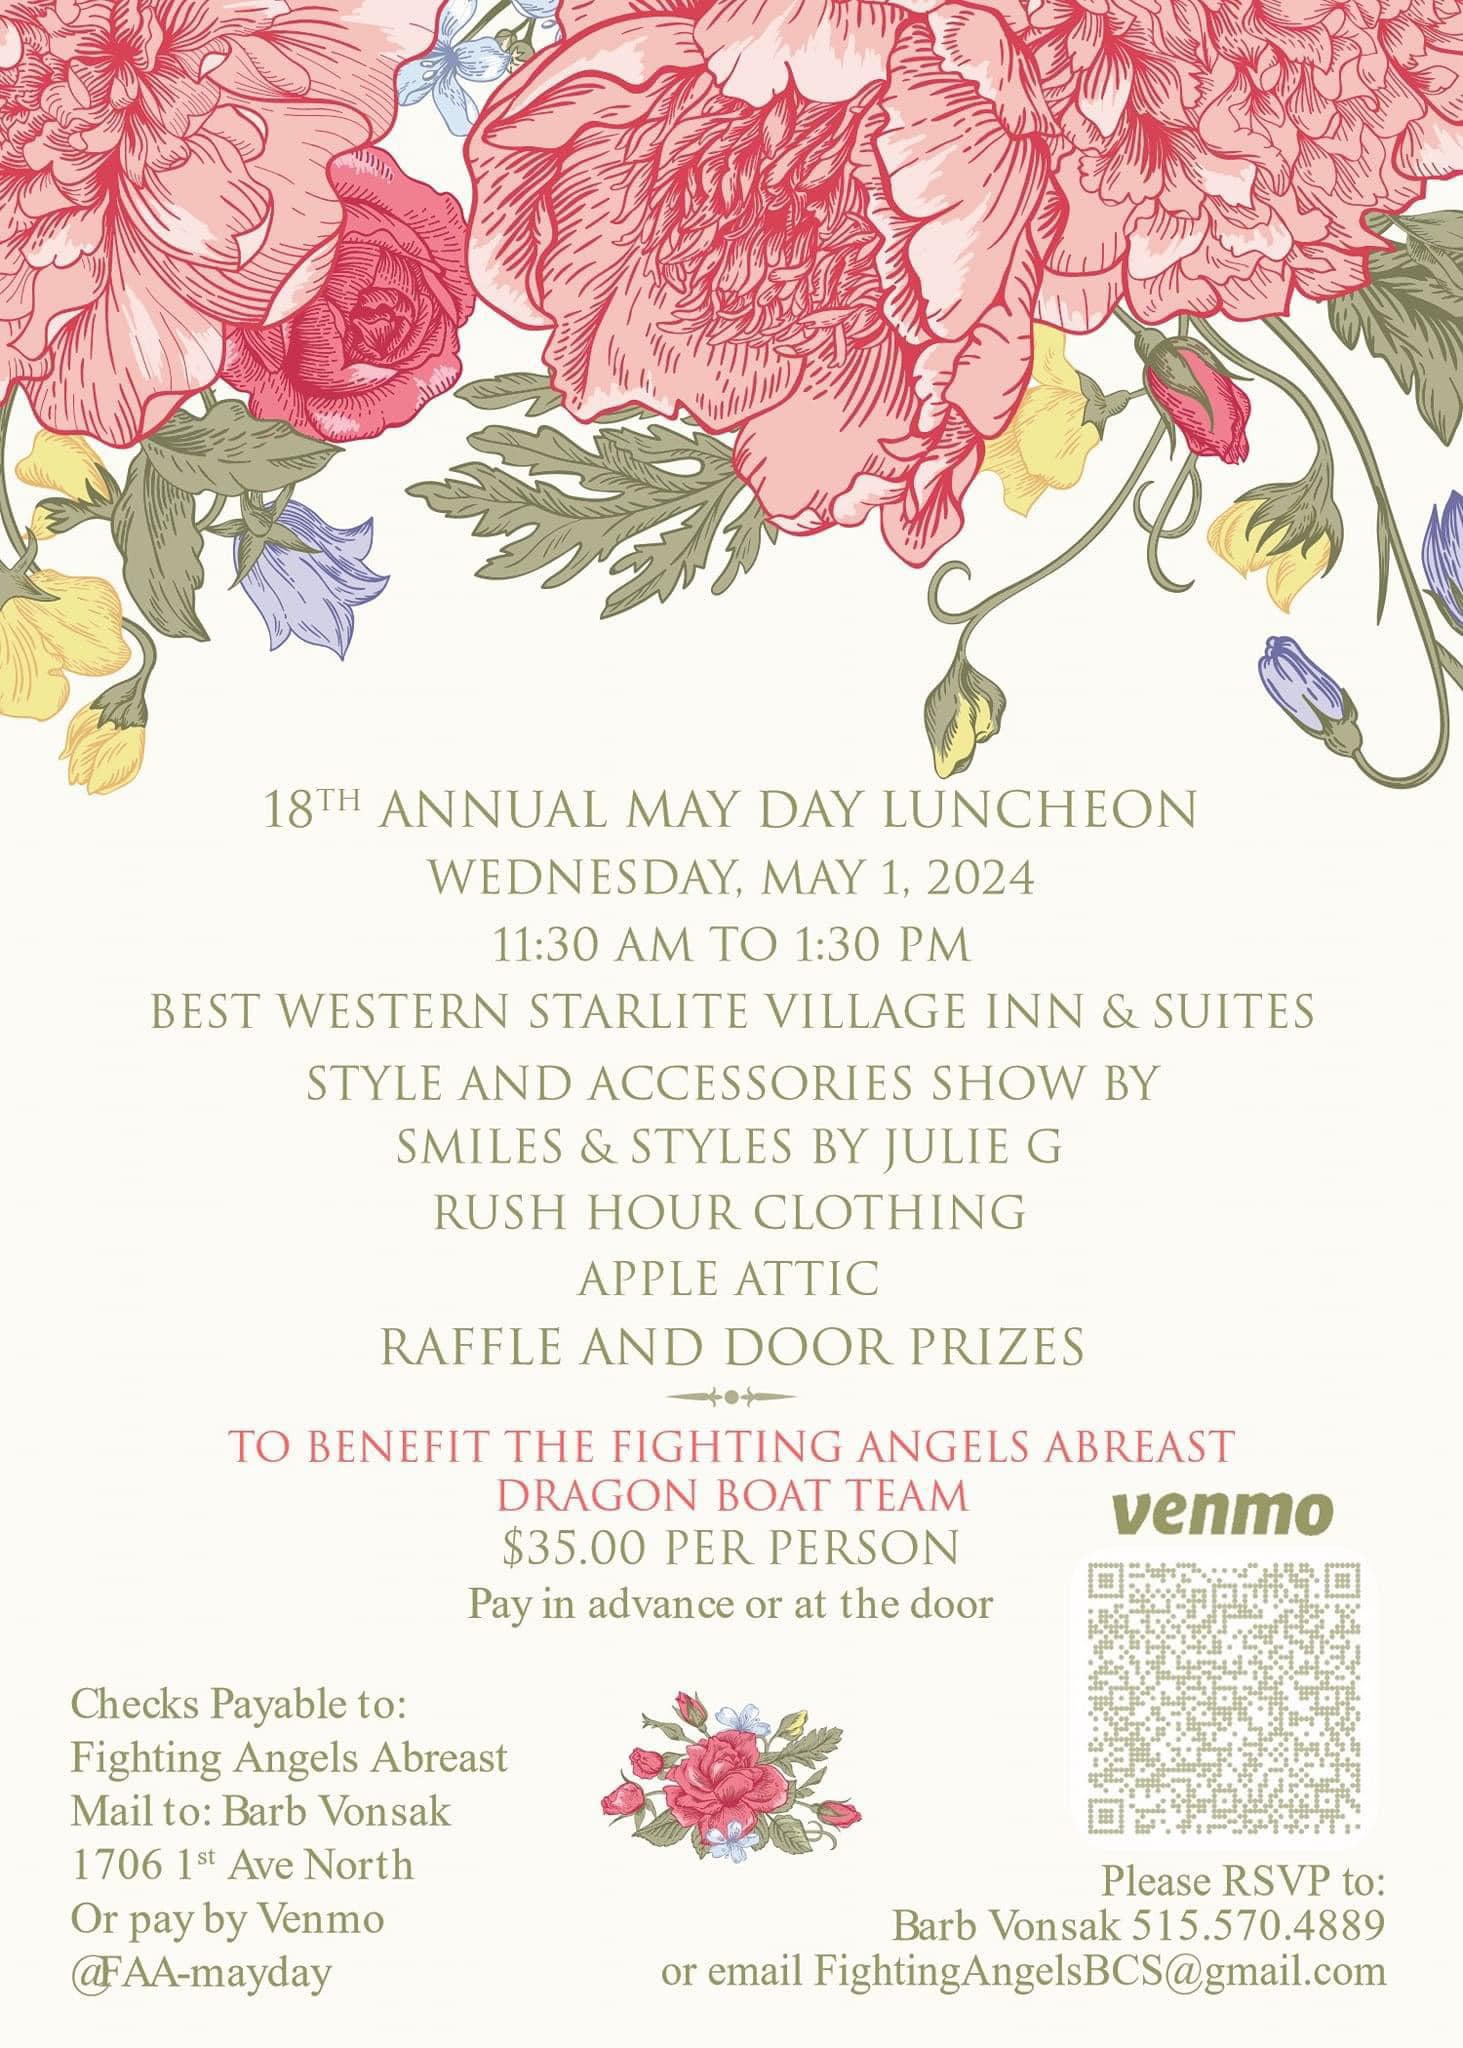 <h1 class="tribe-events-single-event-title">18th Annual May Day Luncheon</h1>